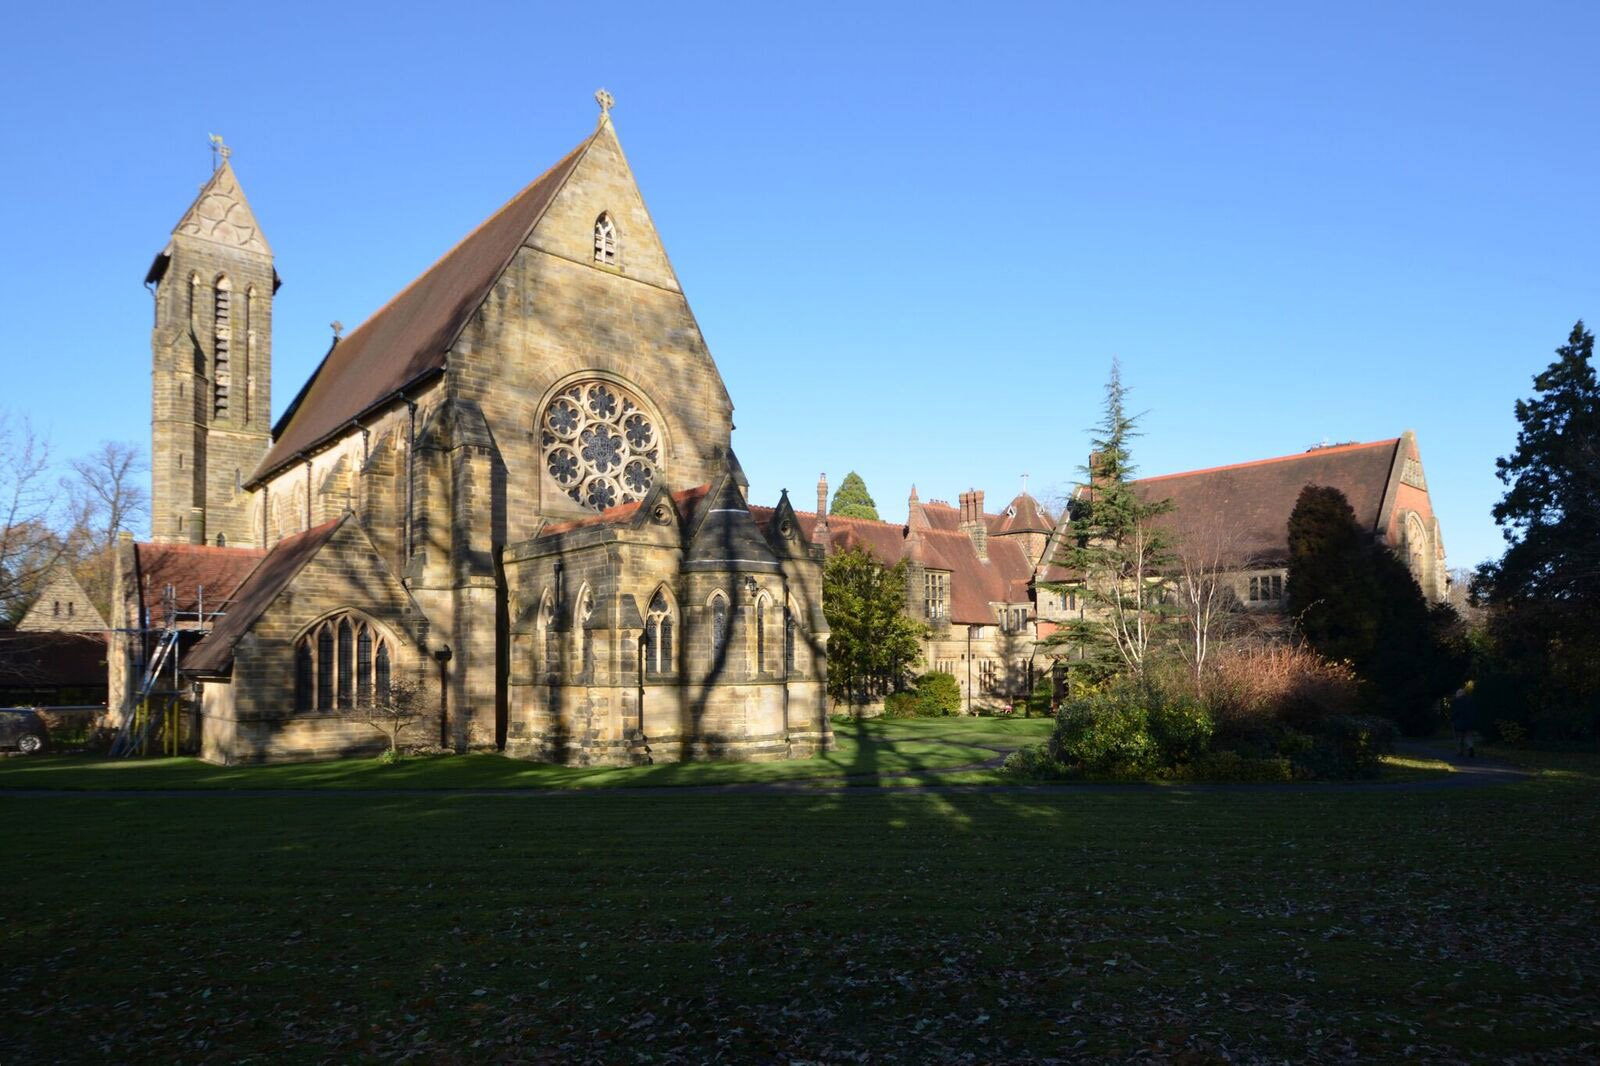 Group of stone buildings, including a church, with shadows cast on the lawn in the foreground and a clear blue sky above.